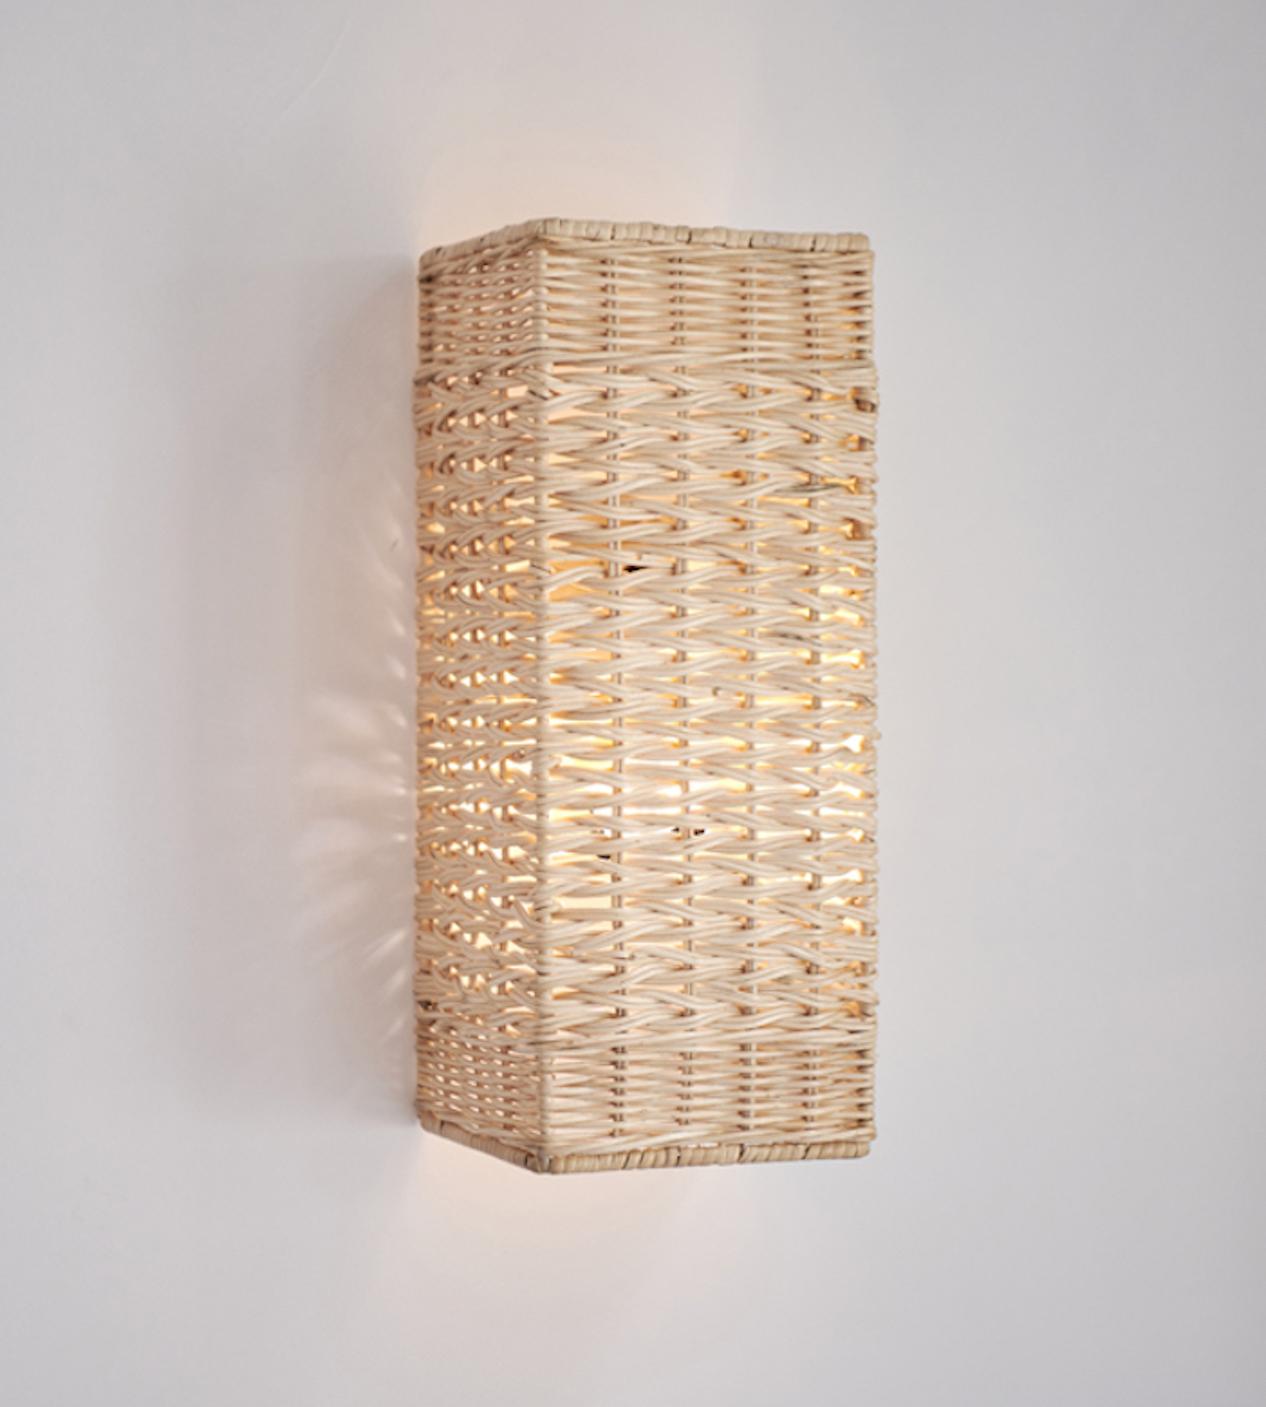 Handwoven Rattan in Indonesia.
Designed by Dunlin.
An elegant, perfectly proportioned rattan wall sconce designed by Dunlin. Timeless in form and impeccable in execution, these are ideal sconces to frame artwork, crown a fireplace or run along a